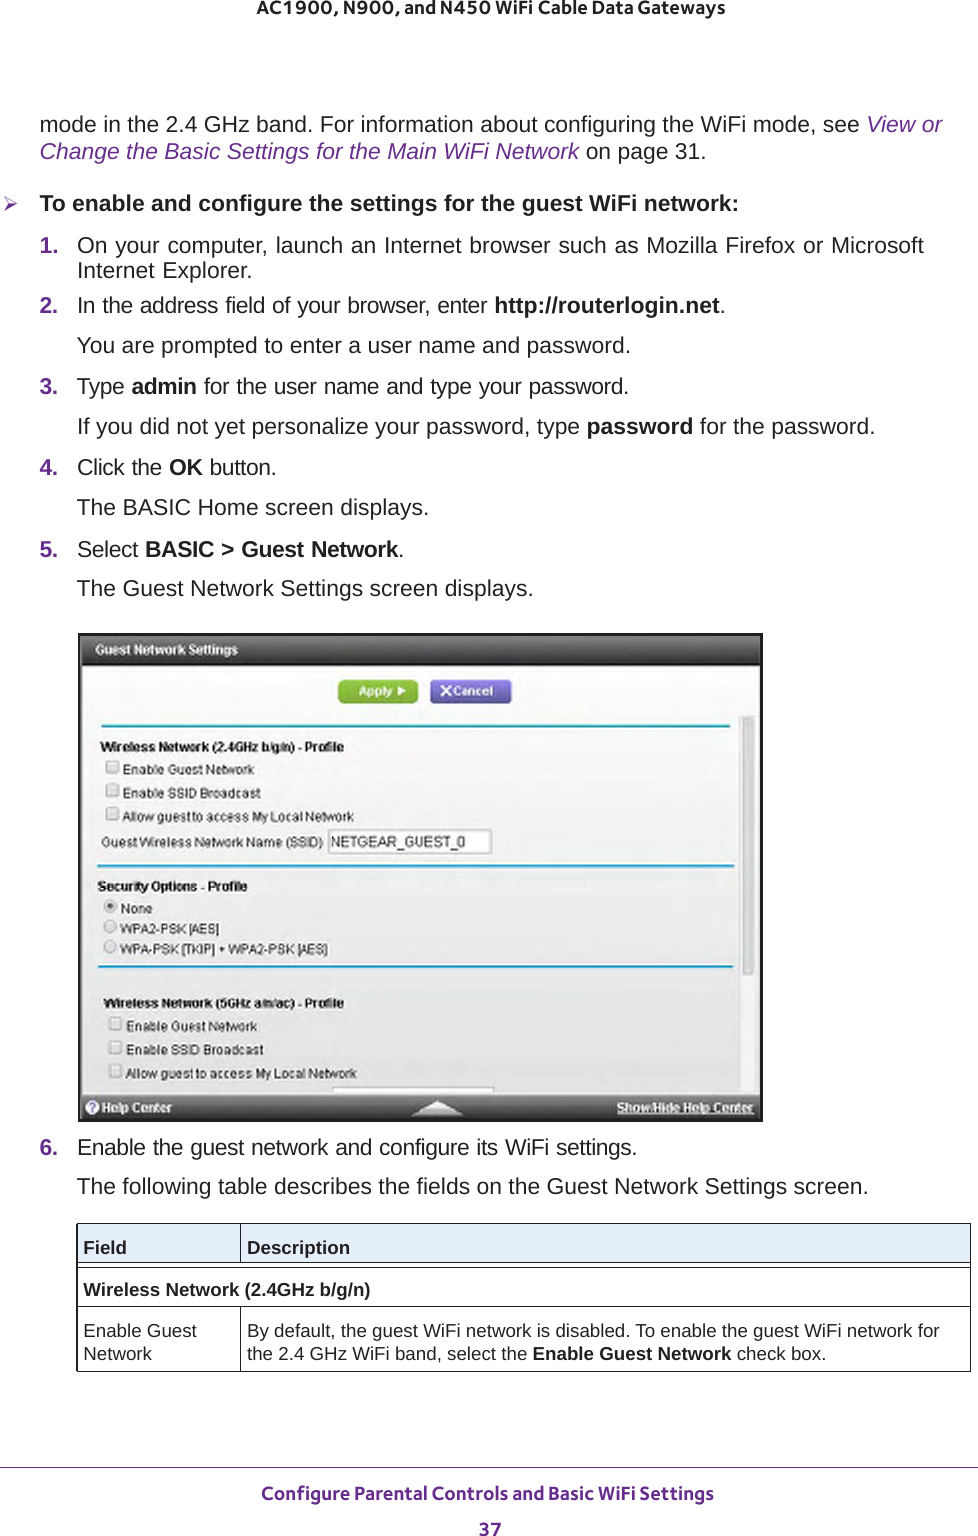 Configure Parental Controls and Basic WiFi Settings 37 AC1900, N900, and N450 WiFi Cable Data Gatewaysmode in the 2.4 GHz band. For information about configuring the WiFi mode, see View or Change the Basic Settings for the Main WiFi Network on page  31.To enable and configure the settings for the guest WiFi network:1.  On your computer, launch an Internet browser such as Mozilla Firefox or Microsoft Internet Explorer. 2.  In the address field of your browser, enter http://routerlogin.net.You are prompted to enter a user name and password.3.  Type admin for the user name and type your password.If you did not yet personalize your password, type password for the password.4.  Click the OK button. The BASIC Home screen displays.5.  Select BASIC &gt; Guest Network.The Guest Network Settings screen displays.6.  Enable the guest network and configure its WiFi settings.The following table describes the fields on the Guest Network Settings screen.Field DescriptionWireless Network (2.4GHz b/g/n)Enable Guest NetworkBy default, the guest WiFi network is disabled. To enable the guest WiFi network for the 2.4 GHz WiFi band, select the Enable Guest Network check box.